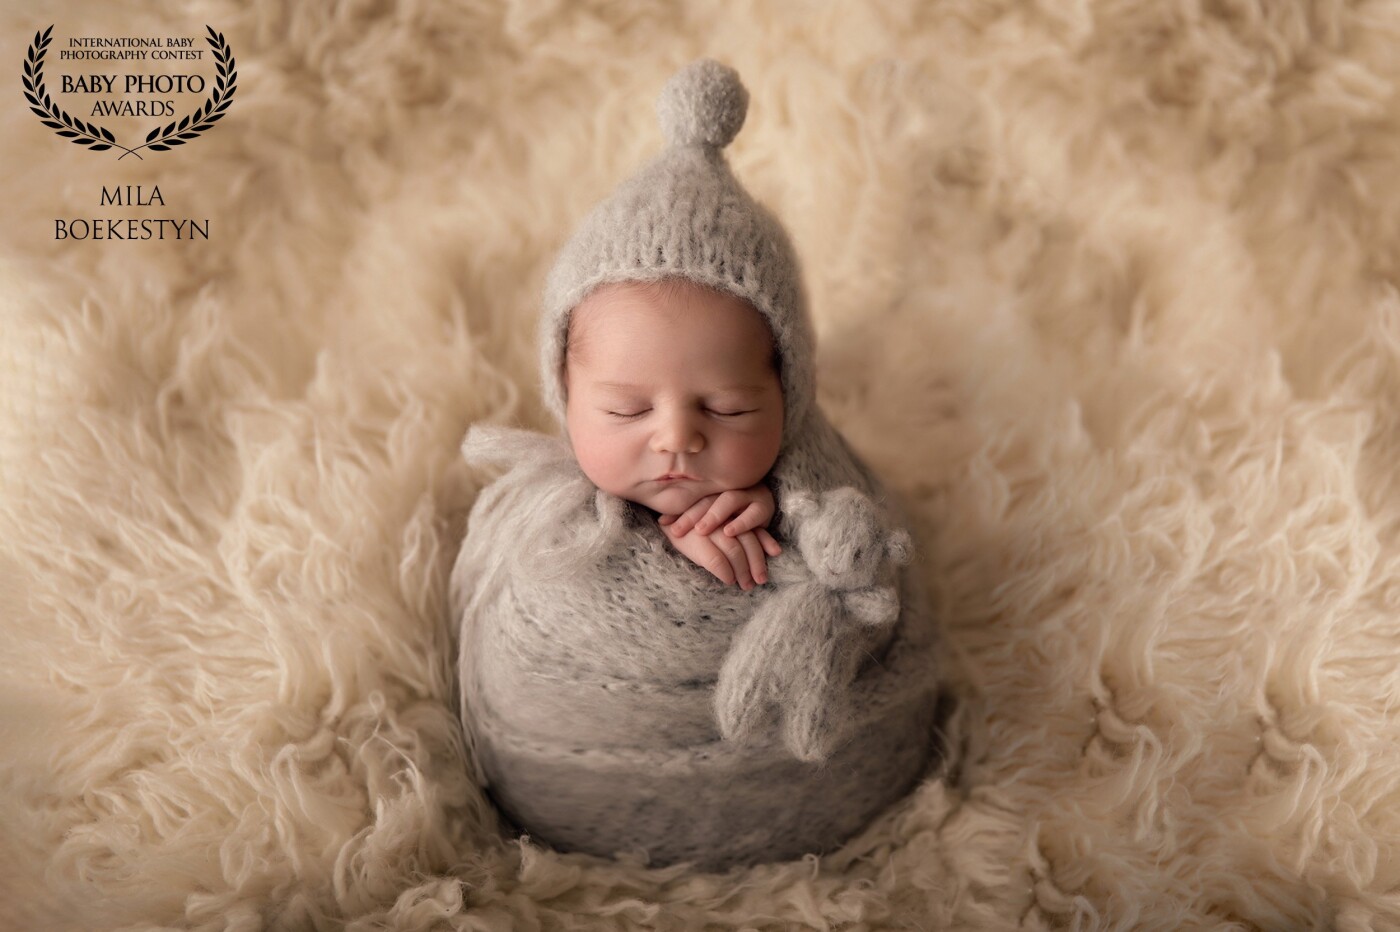 Absolutely love how this shot has turned out - baby boy wrapped and posed on a flokati and is it just me or does he look like a little Hershey kiss chocolate? So yummy!